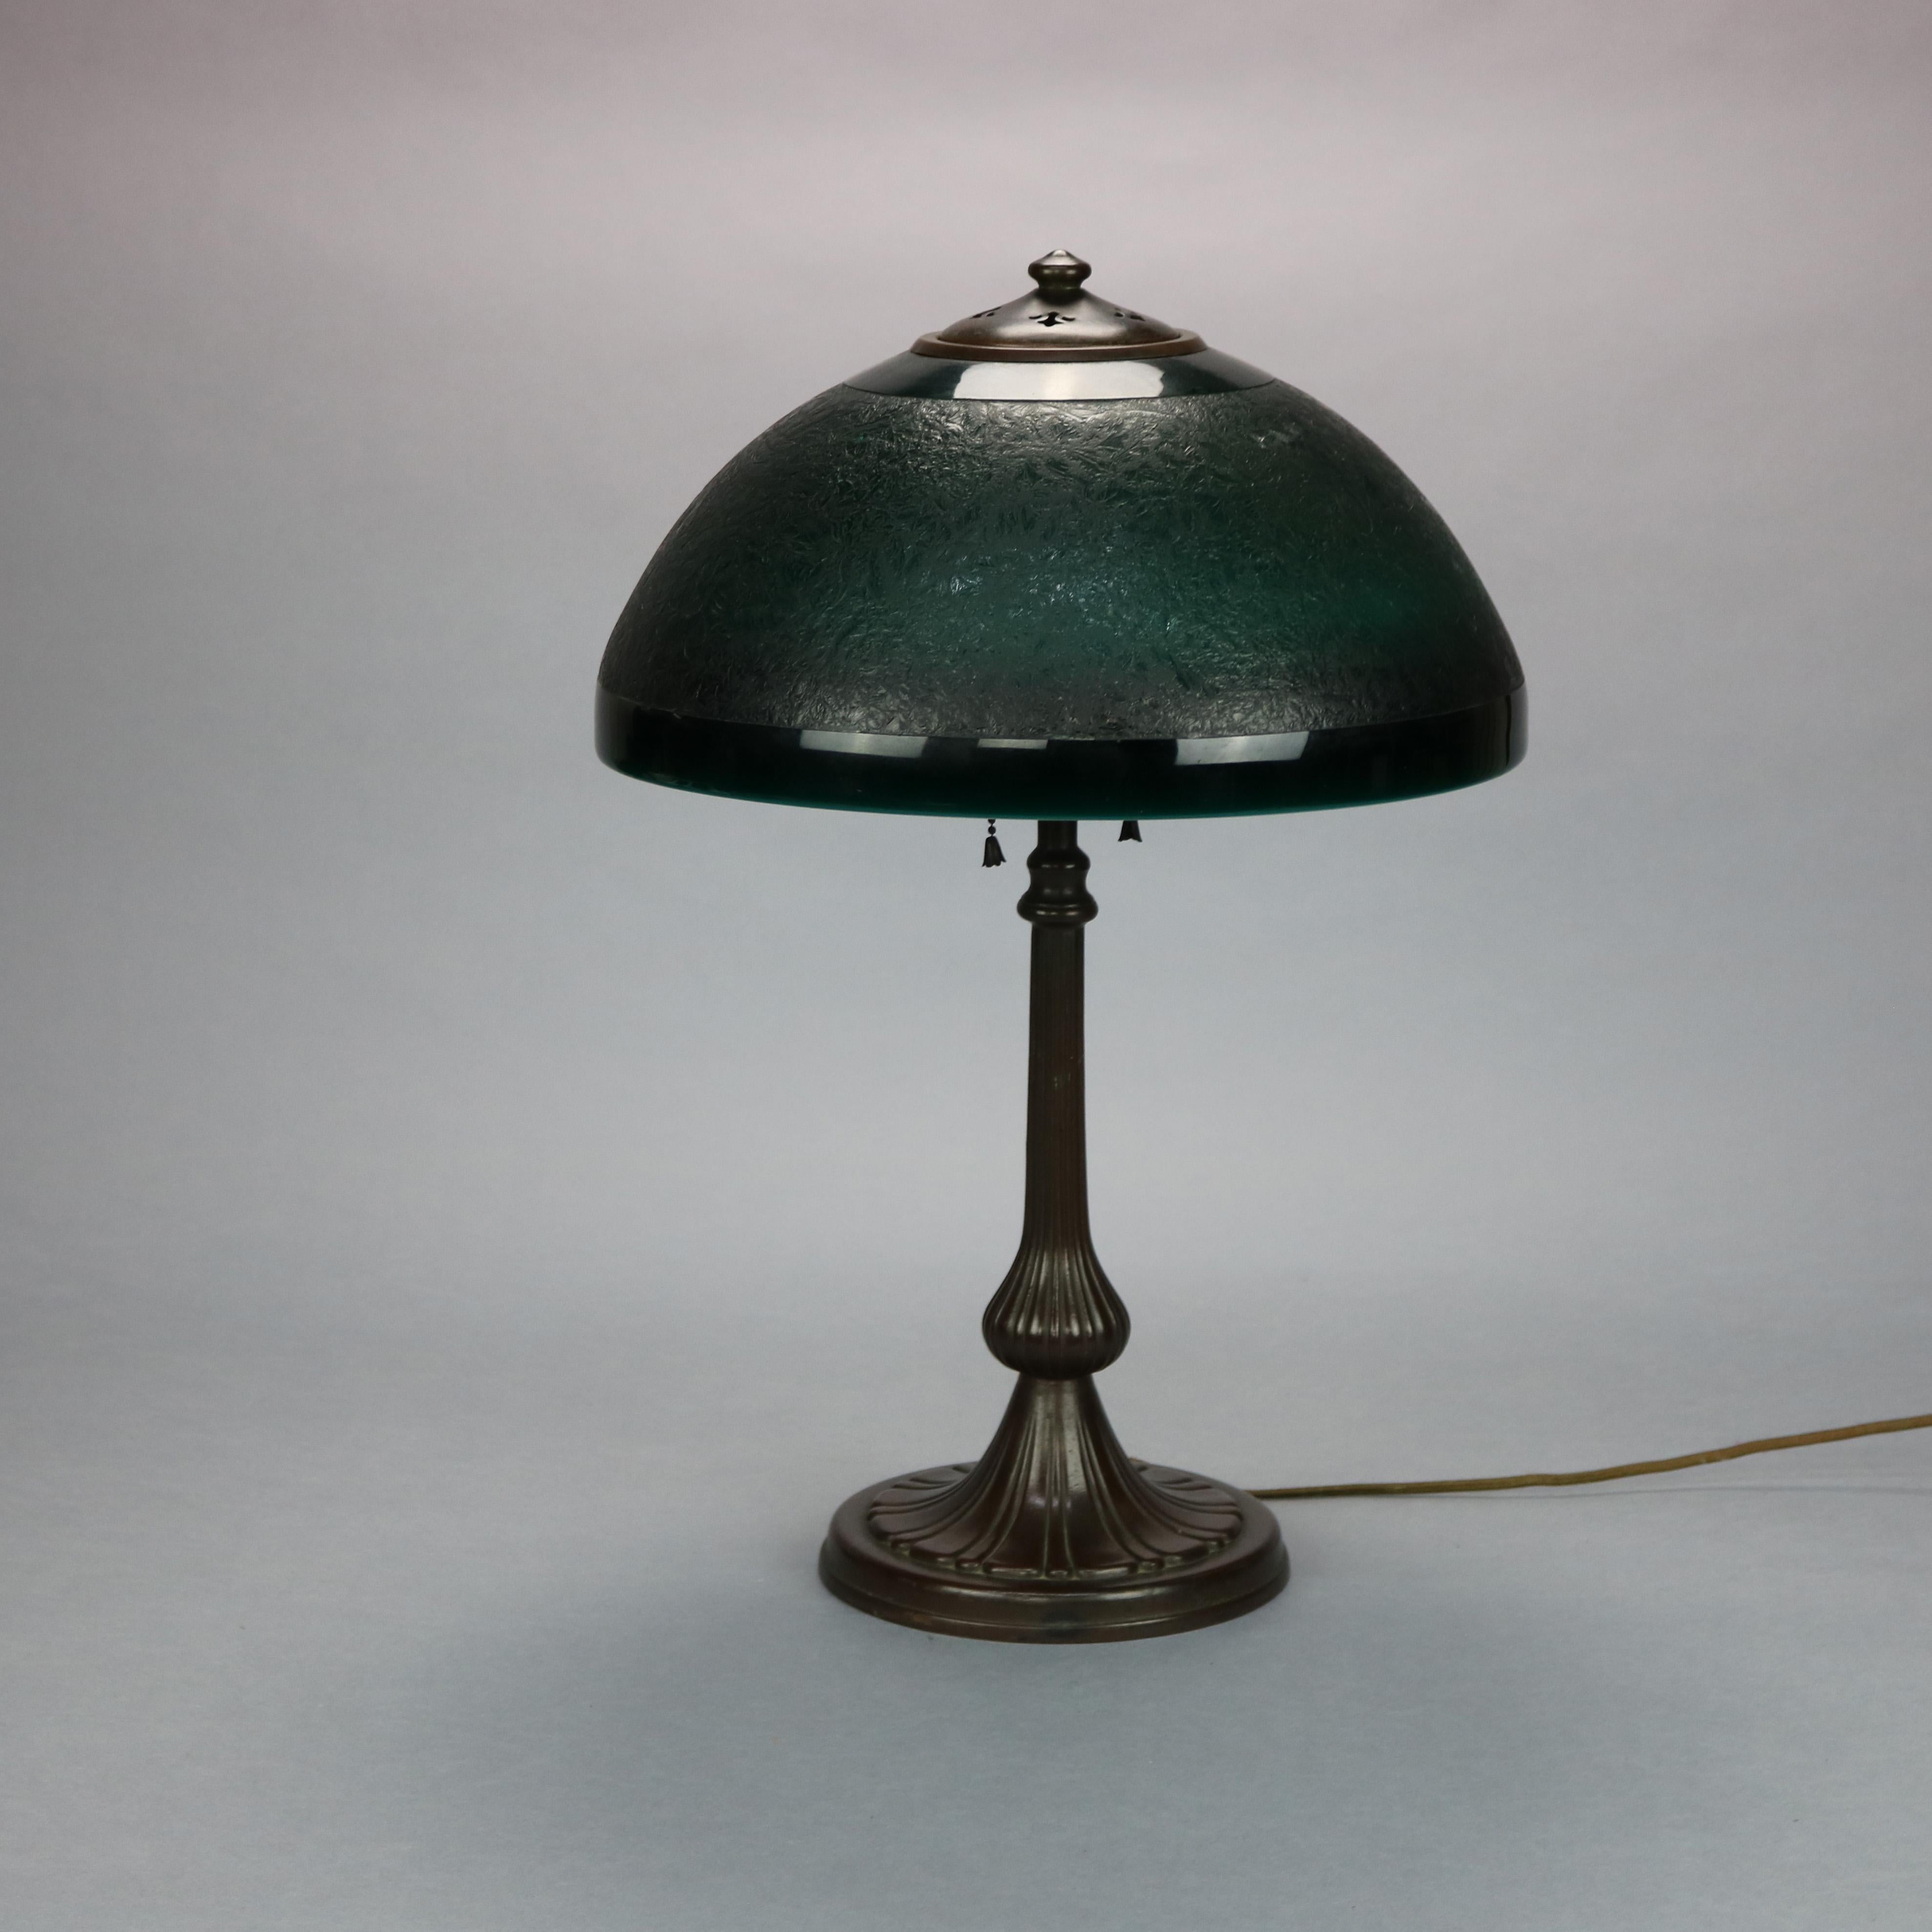 An antique Arts and Crafts table lamp by Handel offers emerald green chipped ice dome shade surmounting double socket cast base, signed on shade as photographed, c1920.

Measures: 21